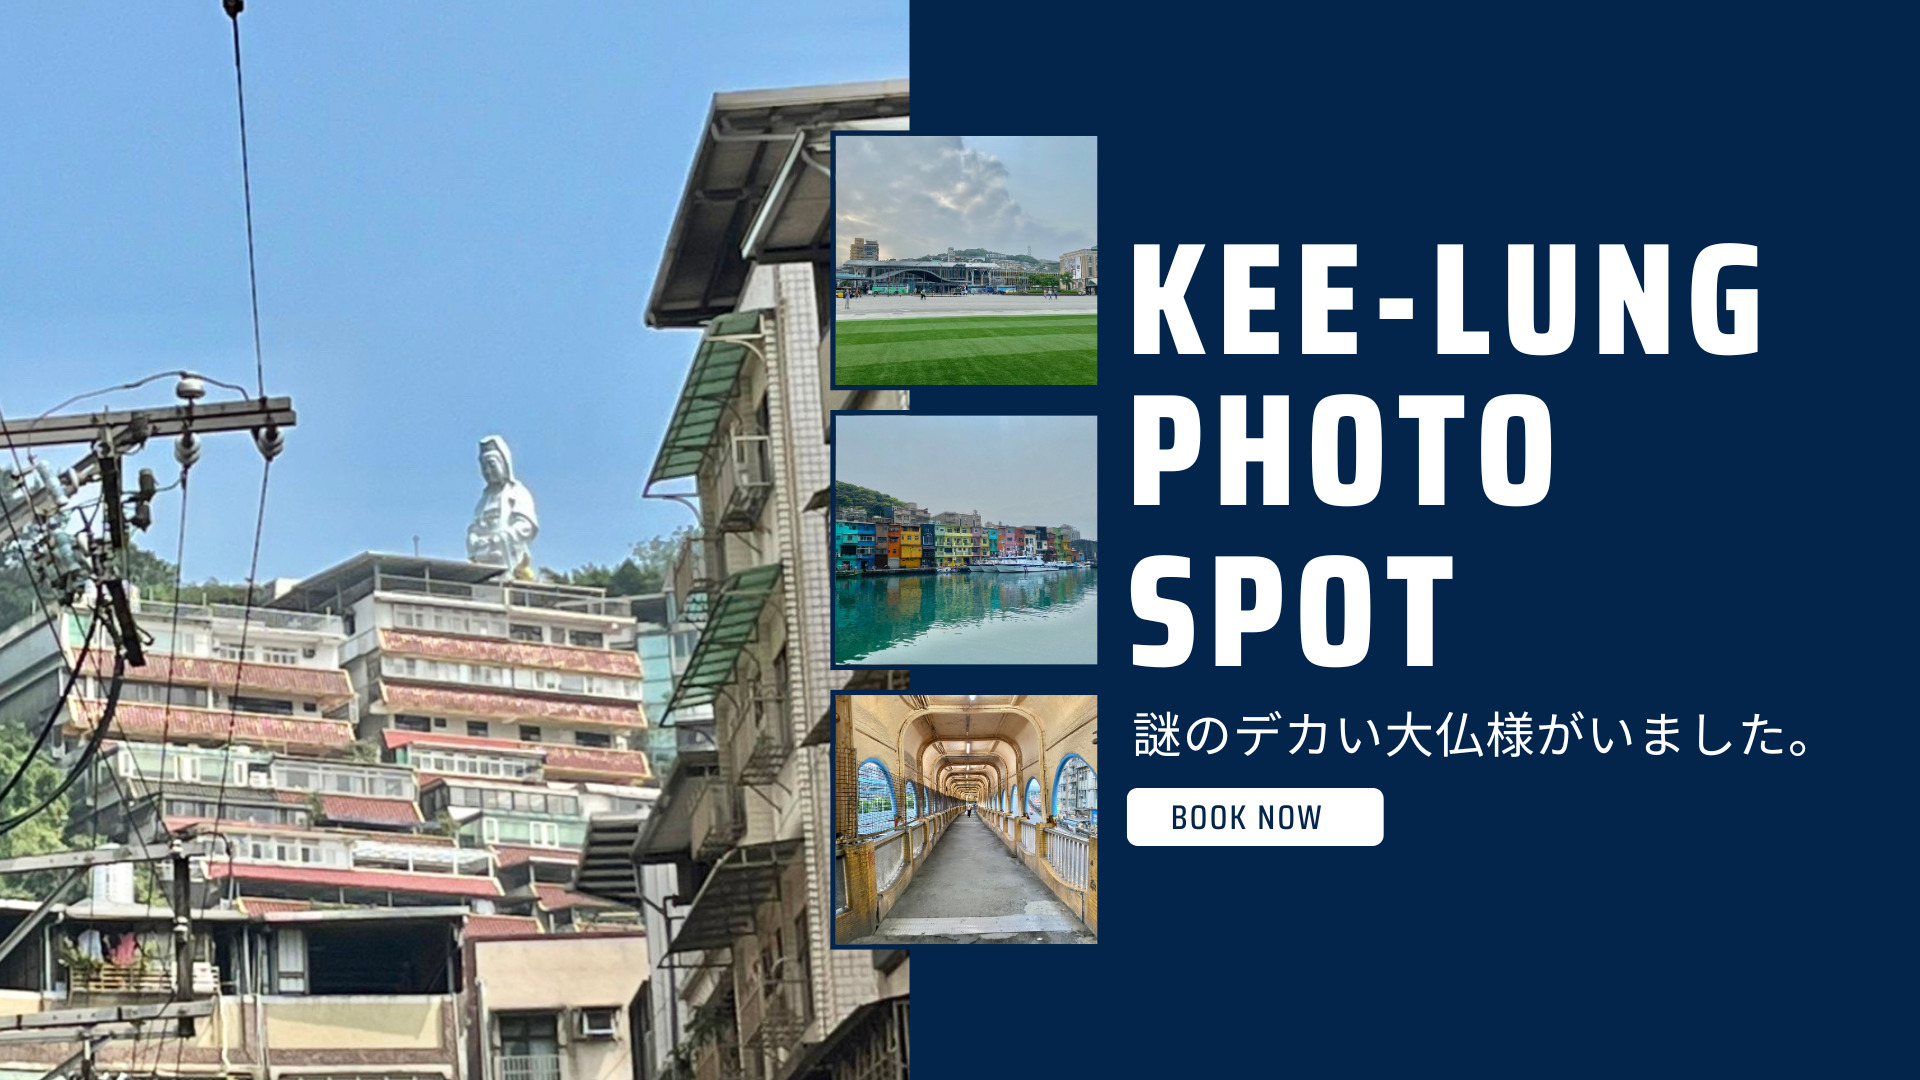 KEELUNG-PHOTO-SPOT（謎のデカい大仏様がいました）